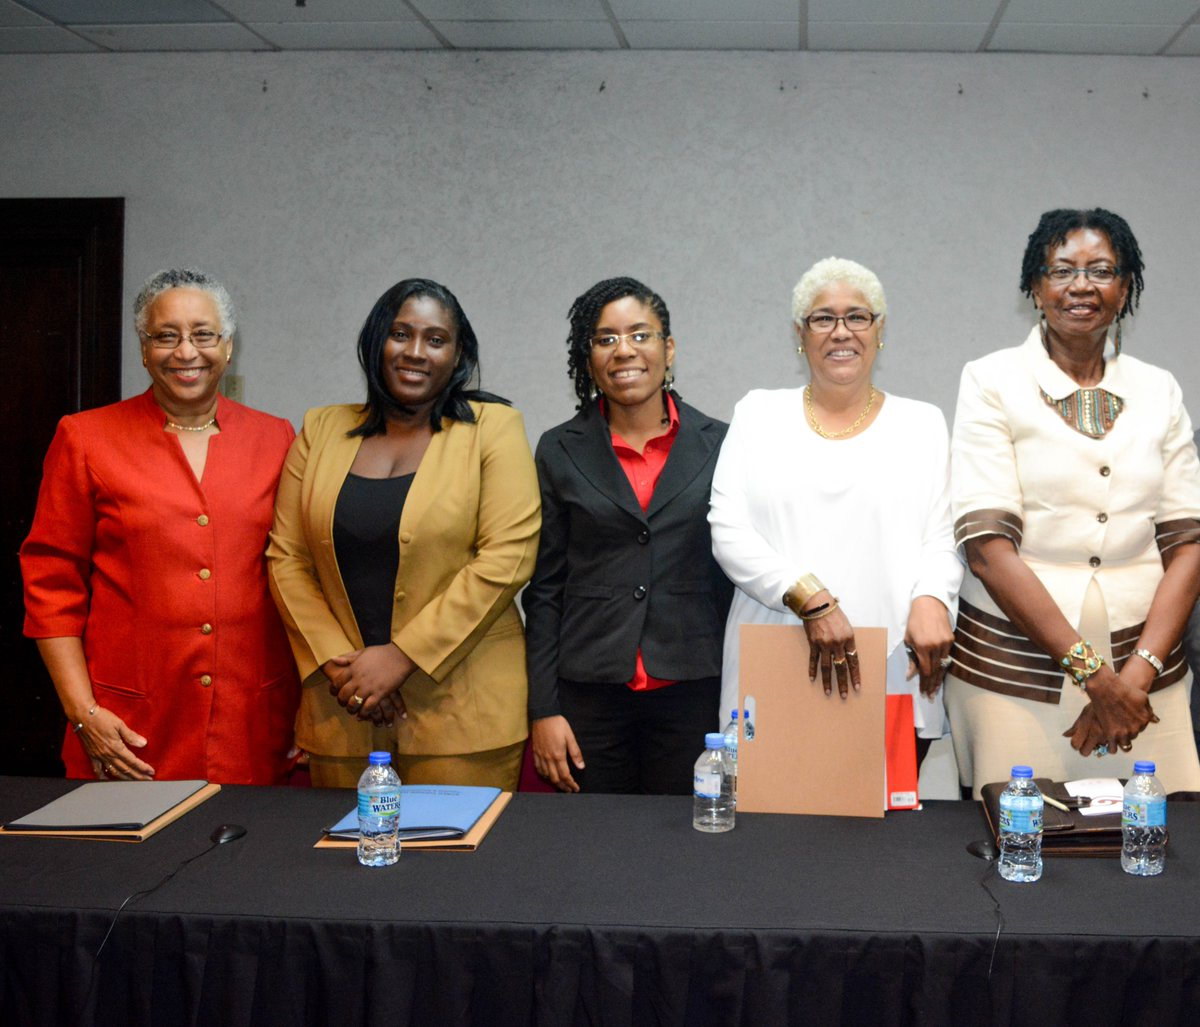 The Panellists with the Chairman of the National Trust . L-R: Ms Maraget Mc Dowall (Chairman, National Trust of Trinidad and Tobago), Ms Esther Vidale (Secretary, Nature Seekers Turtle Trust Board), Ms Johanne Ryan (Conservation Officer, Asa Wright Nature Centre), Ms Rudylynn De Four Roberts (President, International Council on Monuments and Sites (ICOMOS) Trinidad and Tobago) and Dr Rita Pemberton (Former Senior Lecturer, UWI, St Augustine and Independent Researcher)